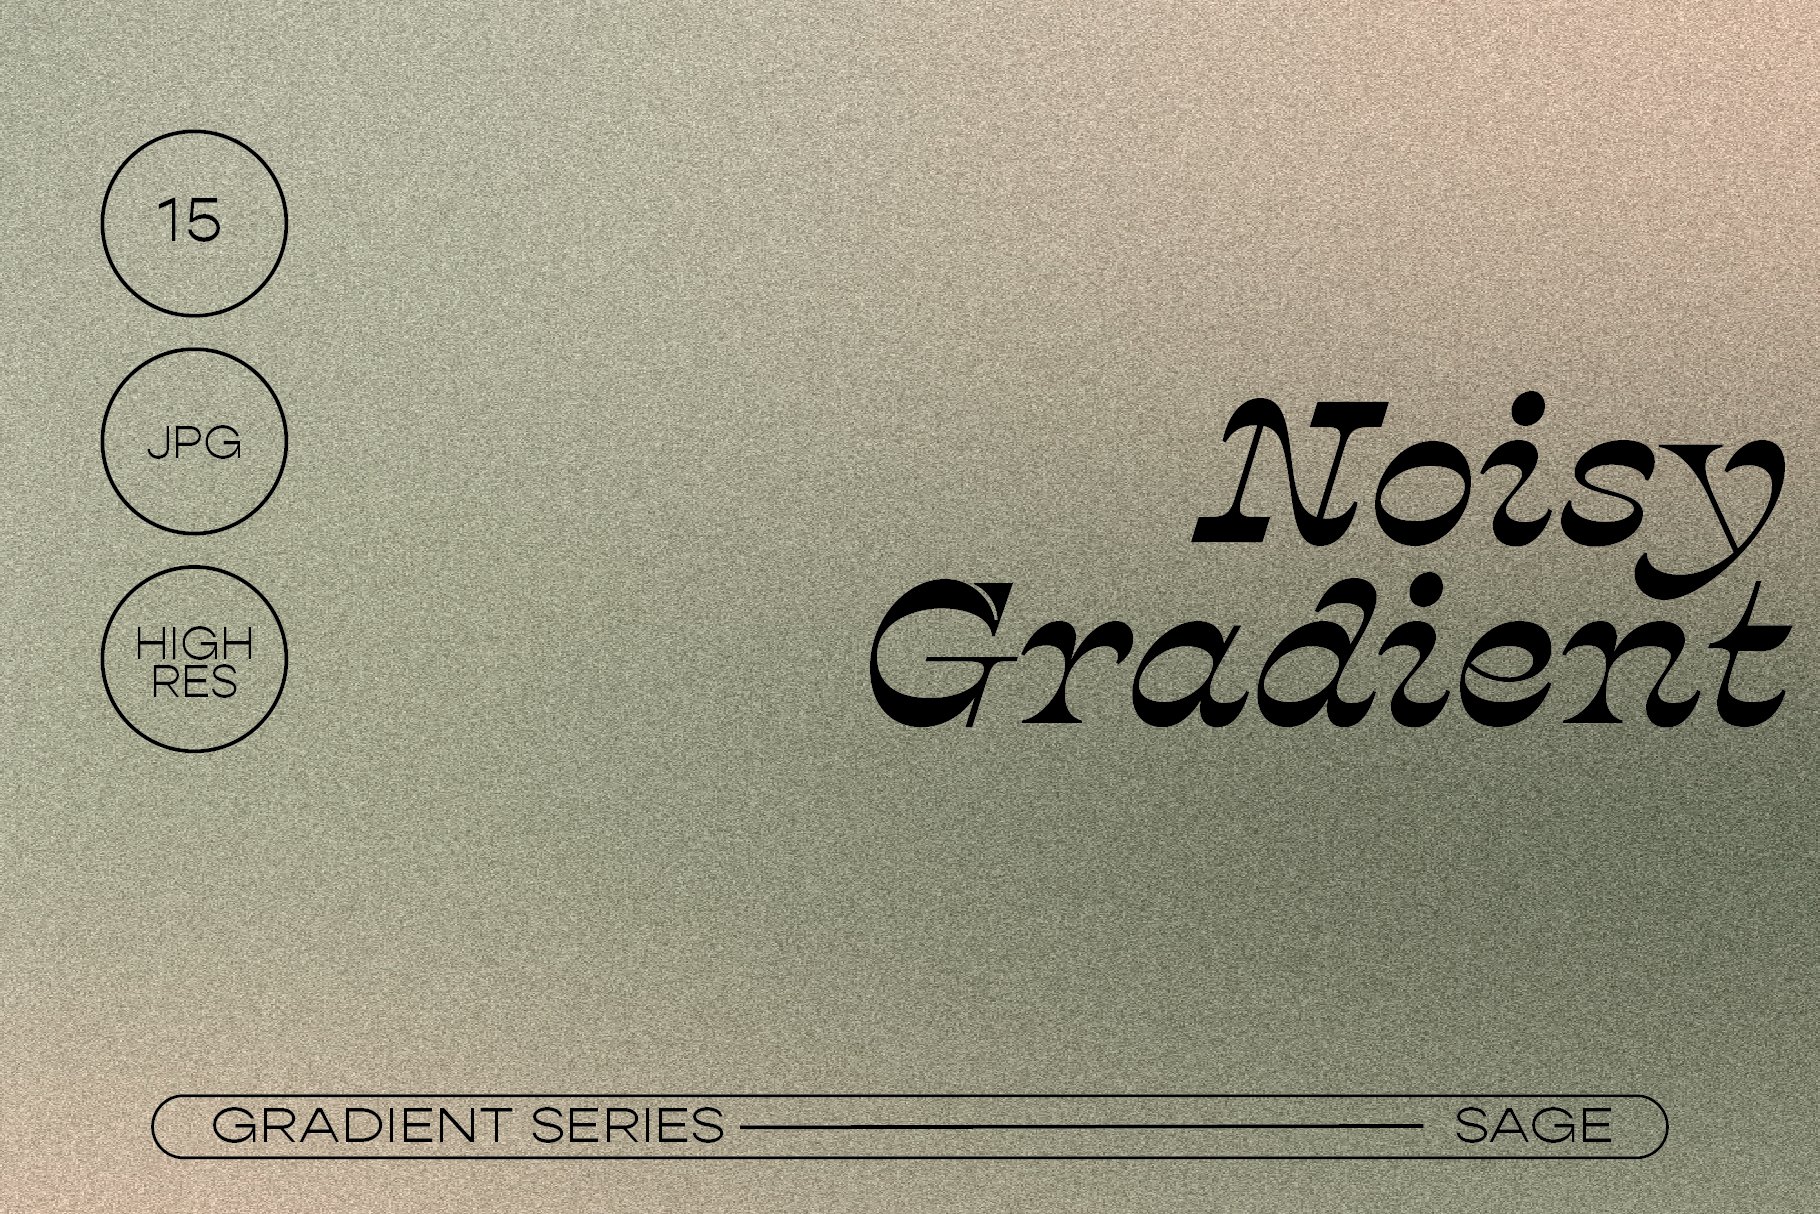 Noisy Gradient | Sage cover image.